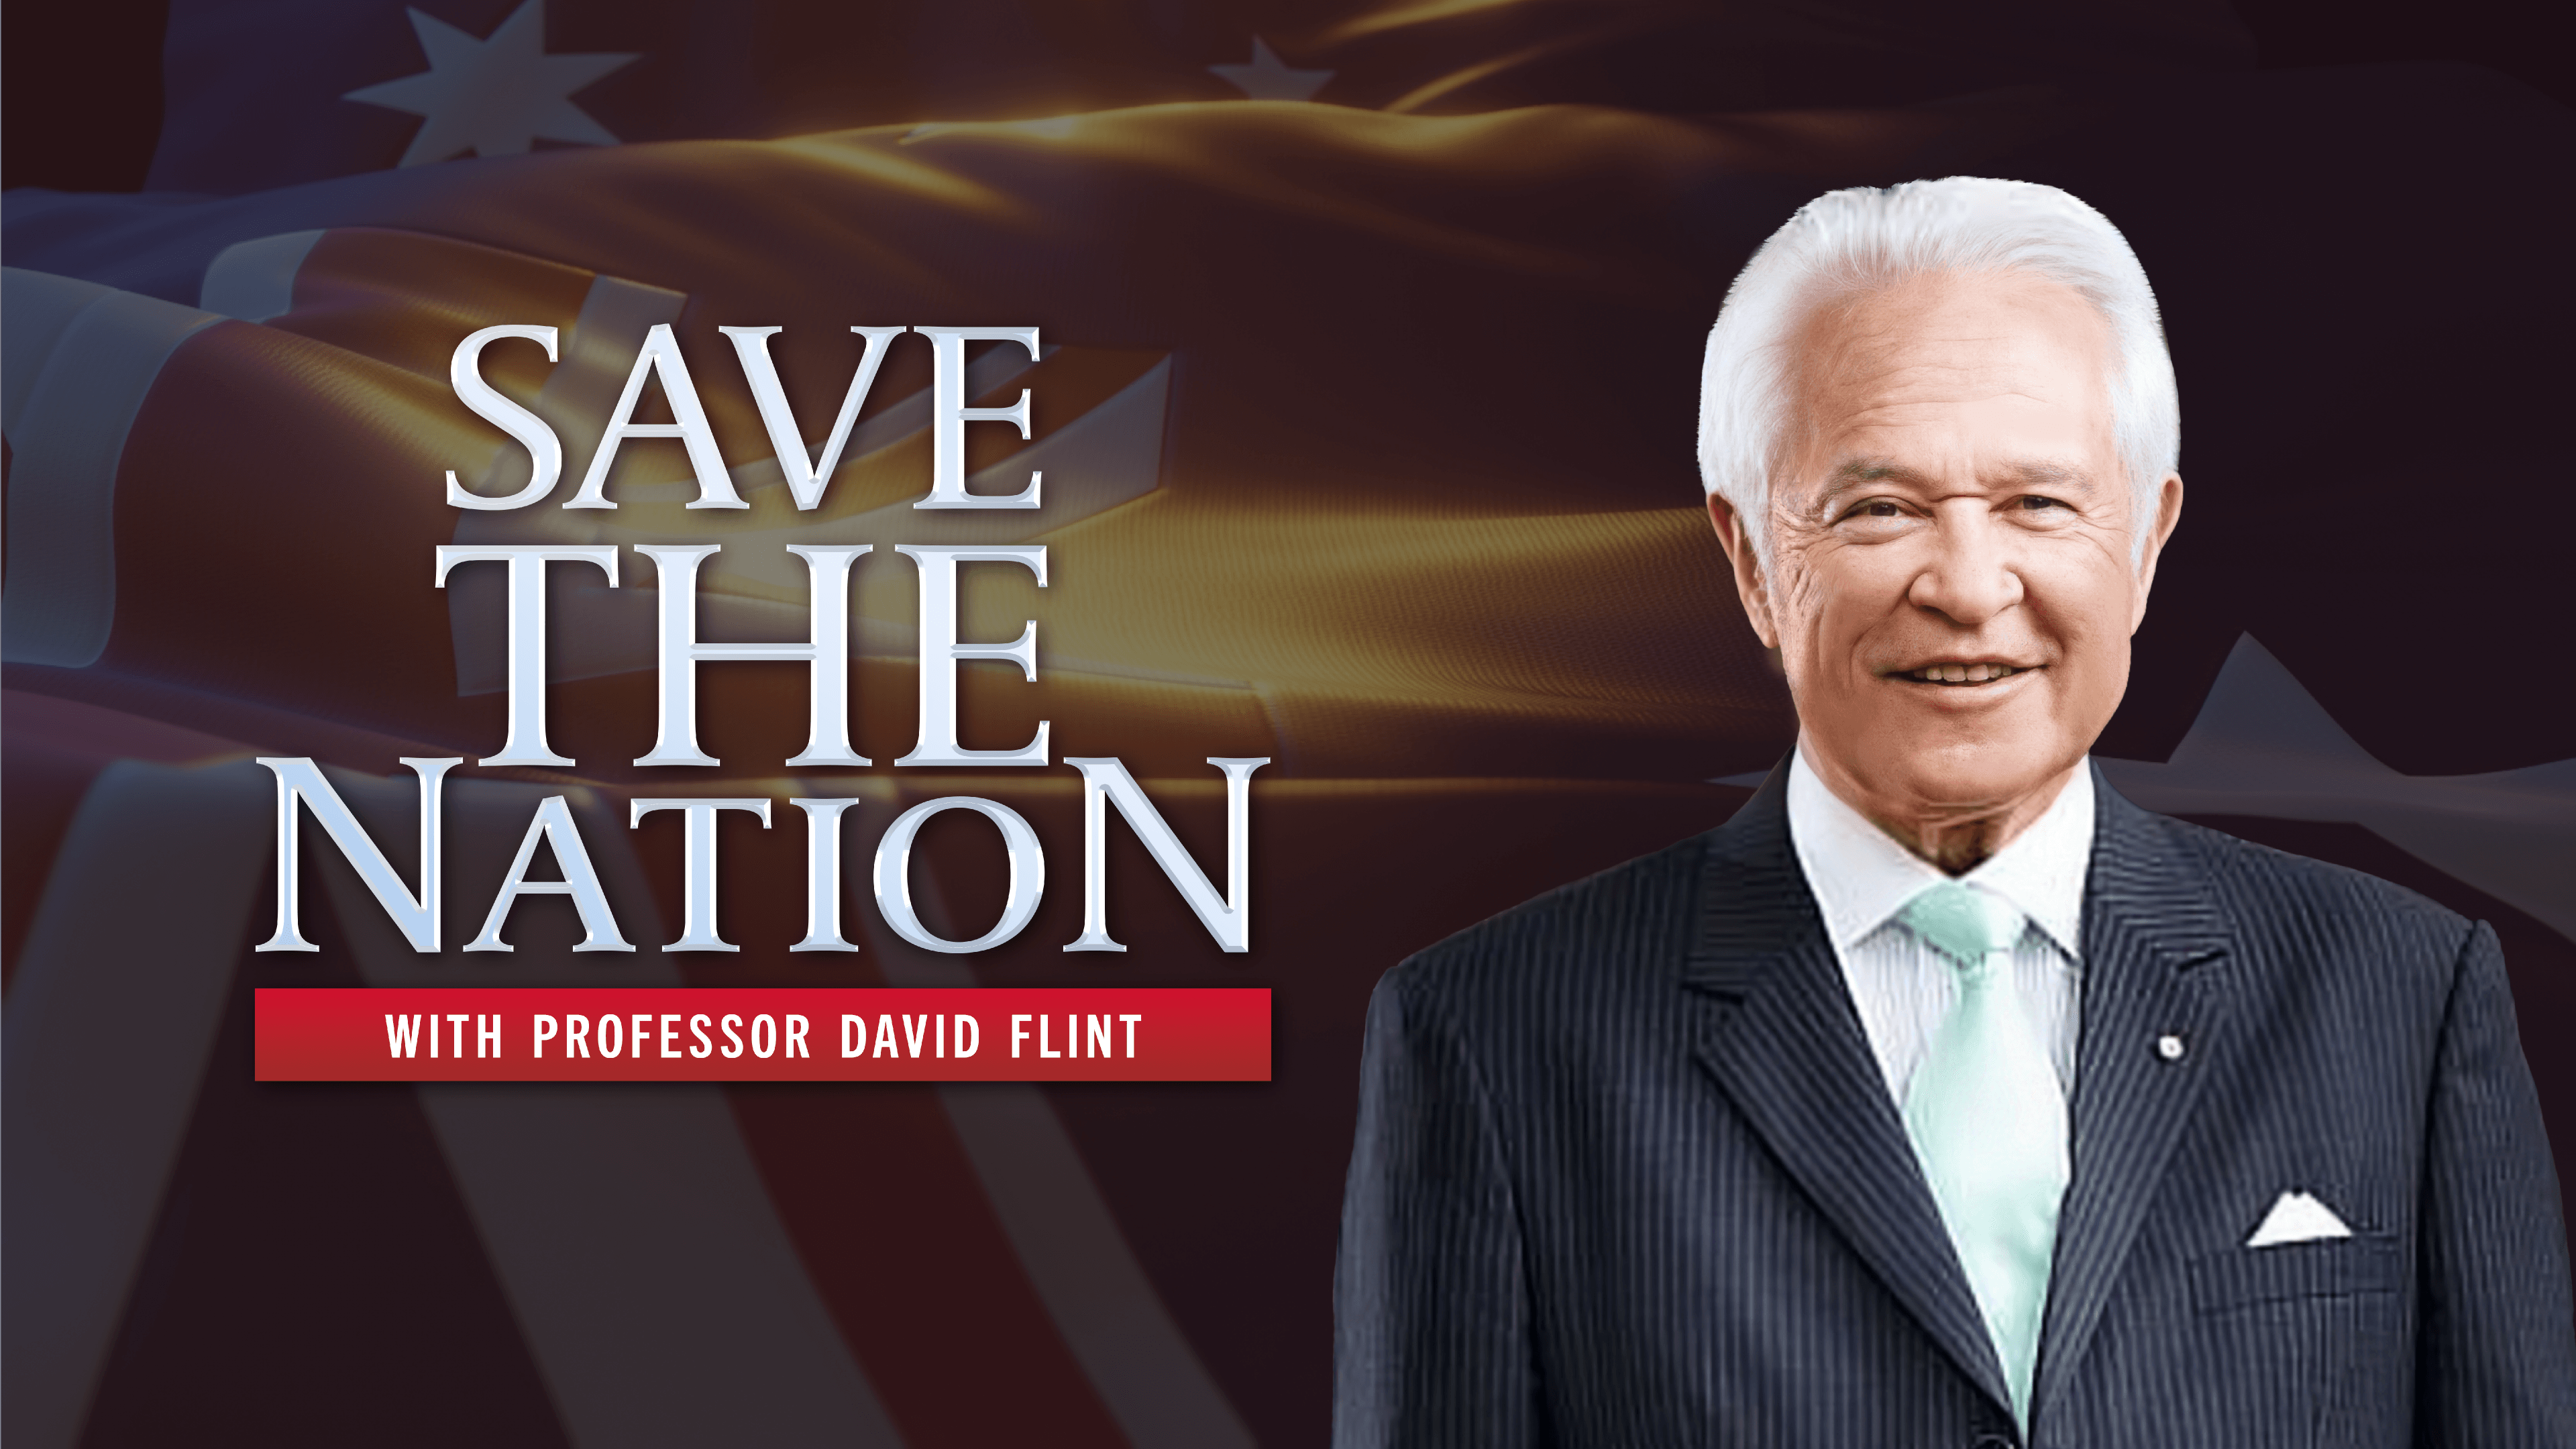 Save The Nation with Prof. David Flint